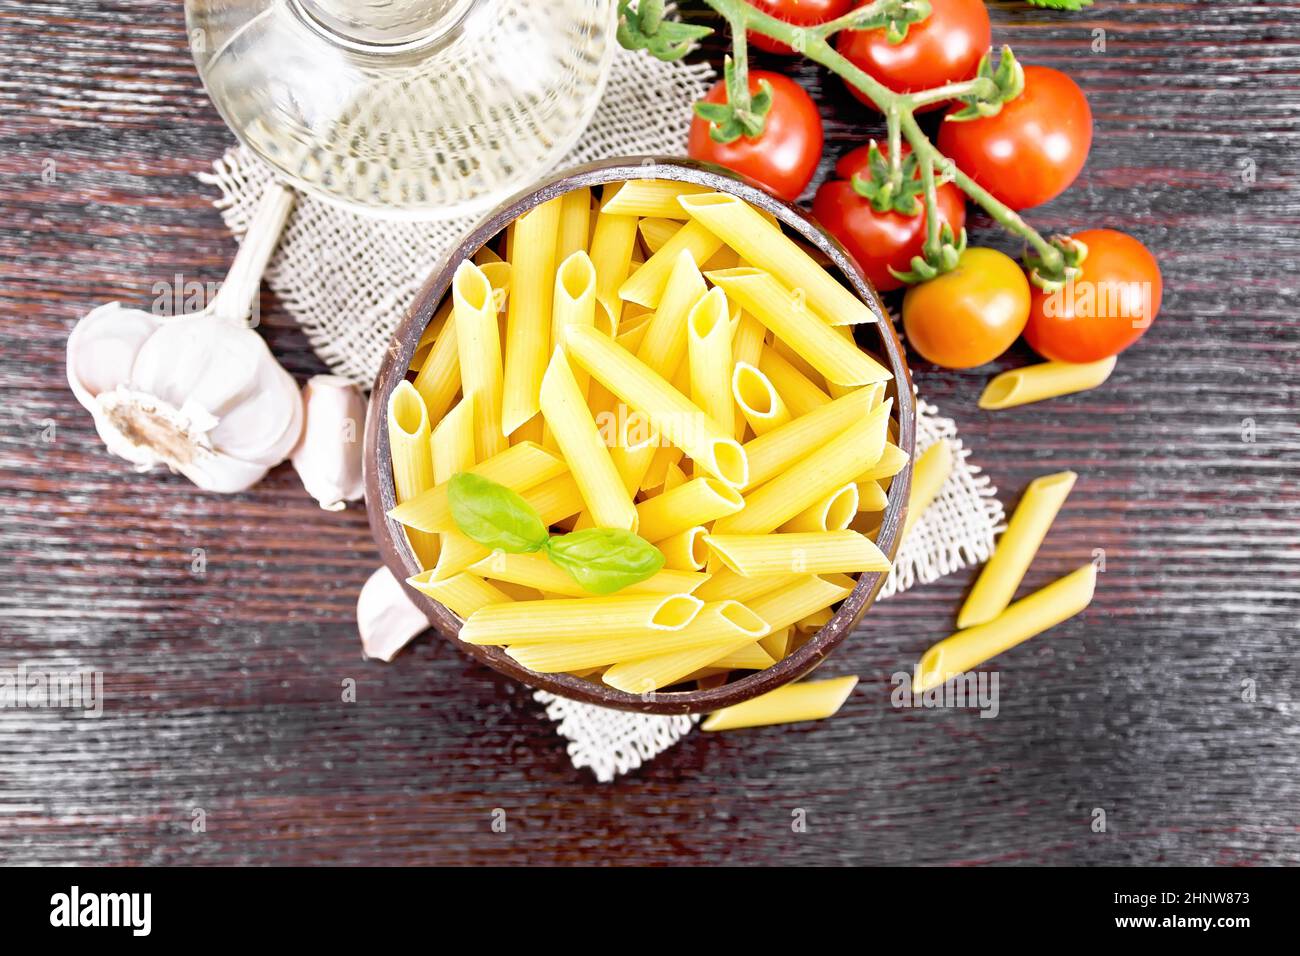 Wheat flour penne pasta in a bowl of coconut shells on sacking, tomatoes, garlic, vegetable oil in a decanter and parsley on wooden board background f Stock Photo